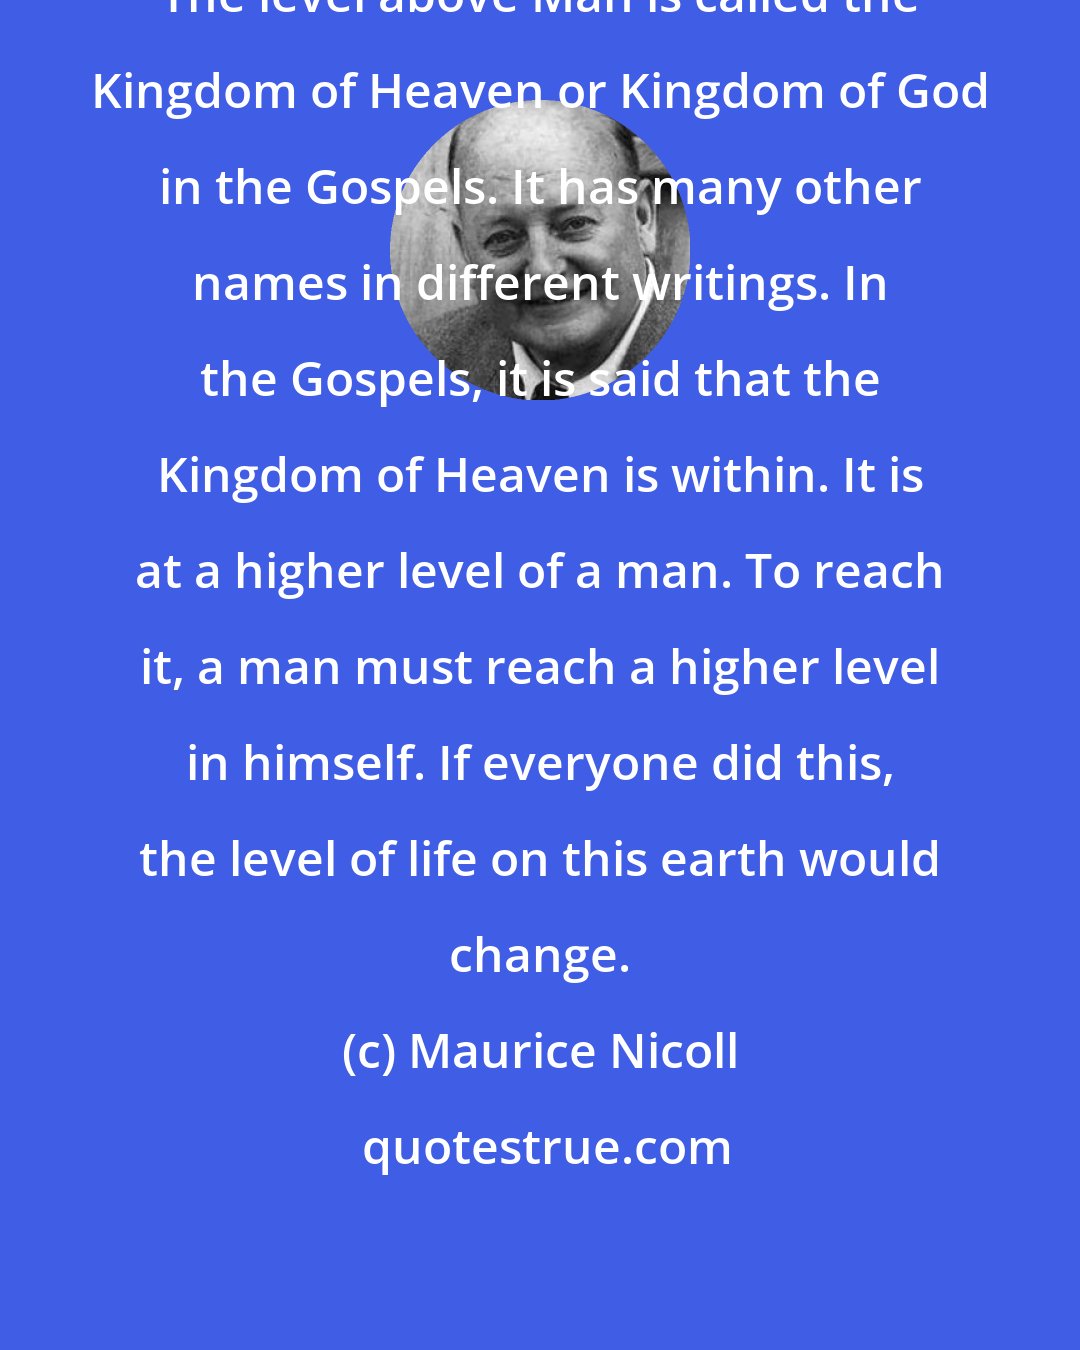 Maurice Nicoll: The level above Man is called the Kingdom of Heaven or Kingdom of God in the Gospels. It has many other names in different writings. In the Gospels, it is said that the Kingdom of Heaven is within. It is at a higher level of a man. To reach it, a man must reach a higher level in himself. If everyone did this, the level of life on this earth would change.